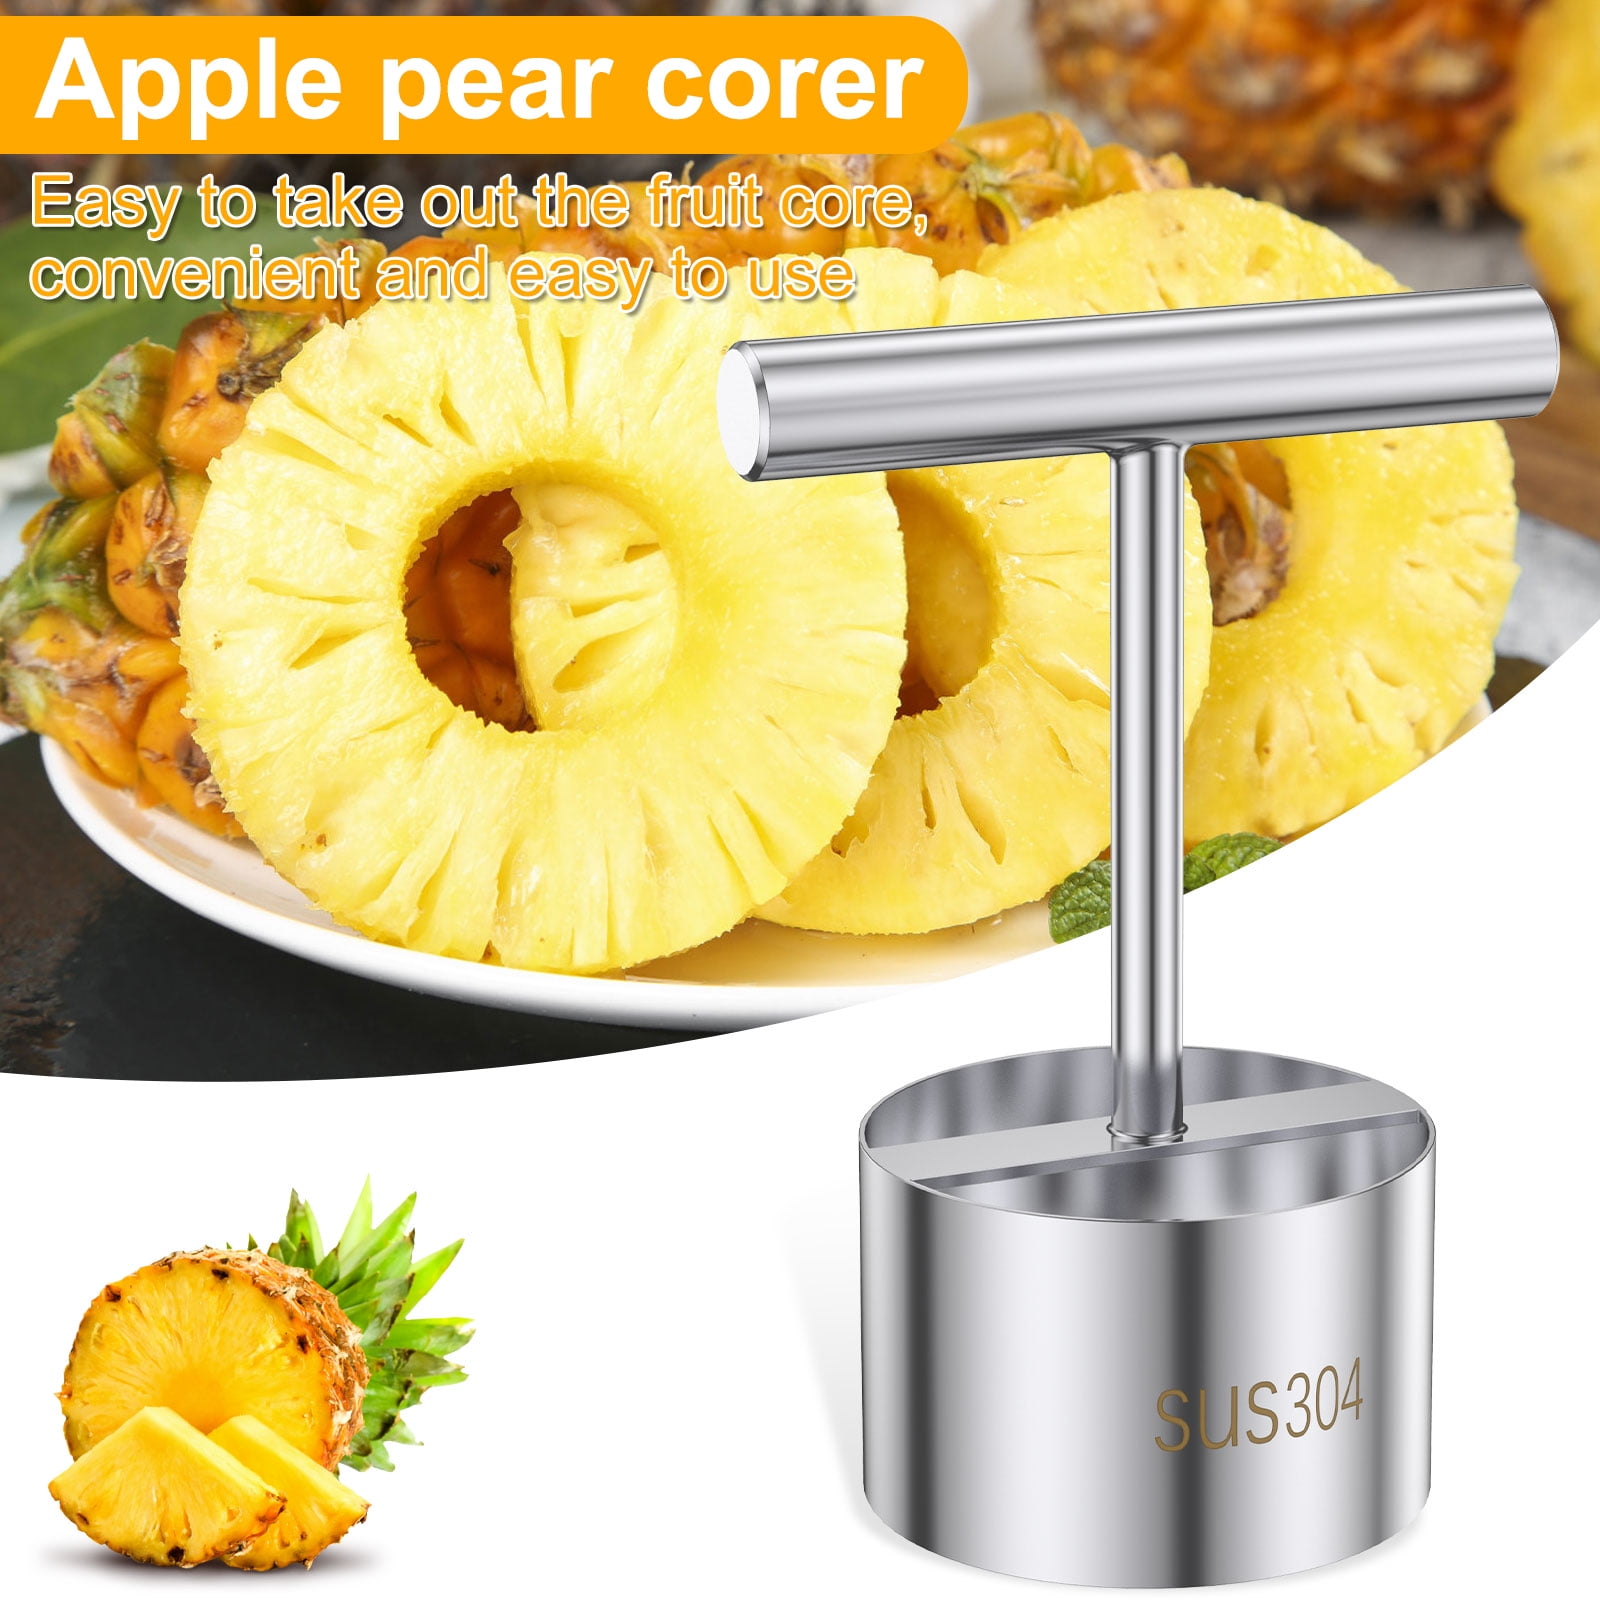 Apple and Pear Corer by OXO – The Essential Things